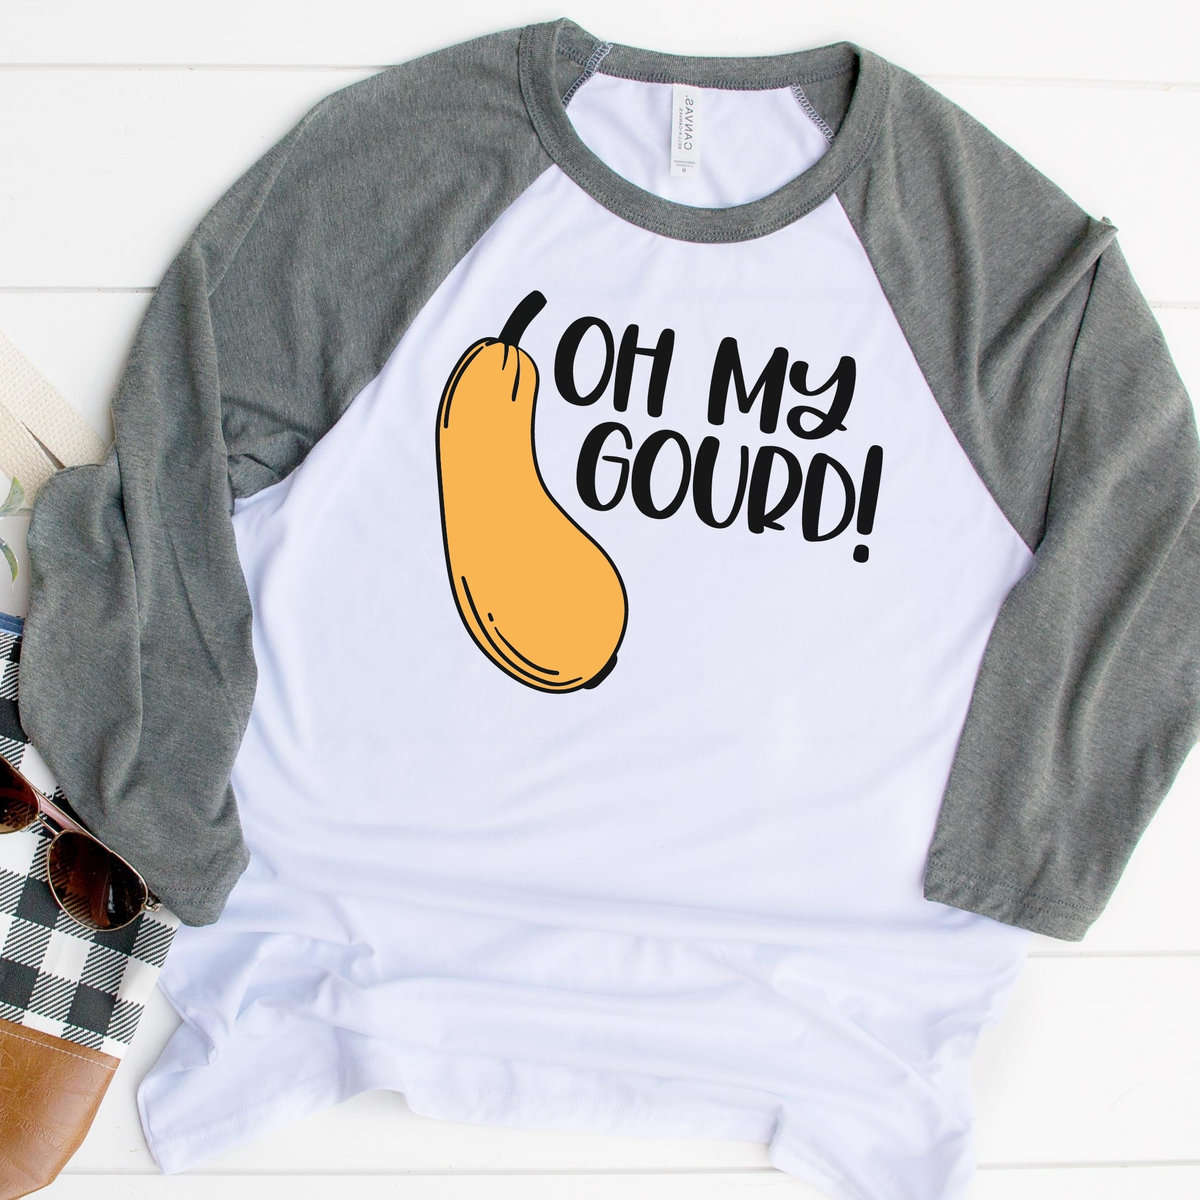 Shirt with a design that reads "Oh My Gourd!".